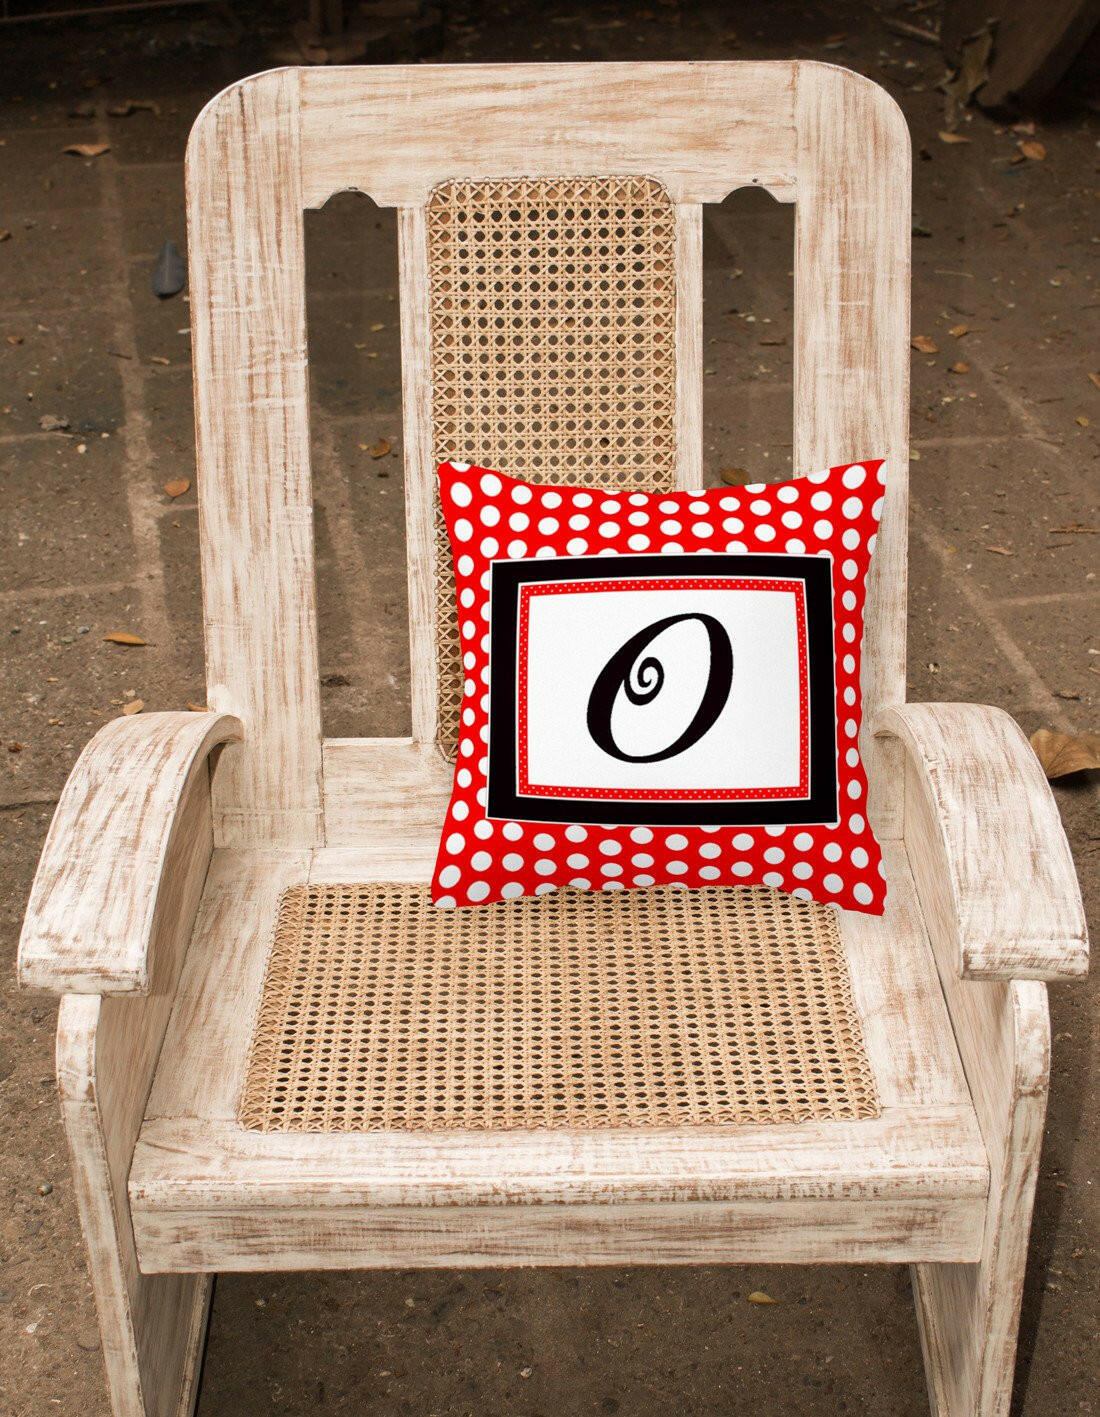 Letter O Initial Monogram Red Black Polka Dots Decorative Canvas Fabric Pillow - the-store.com